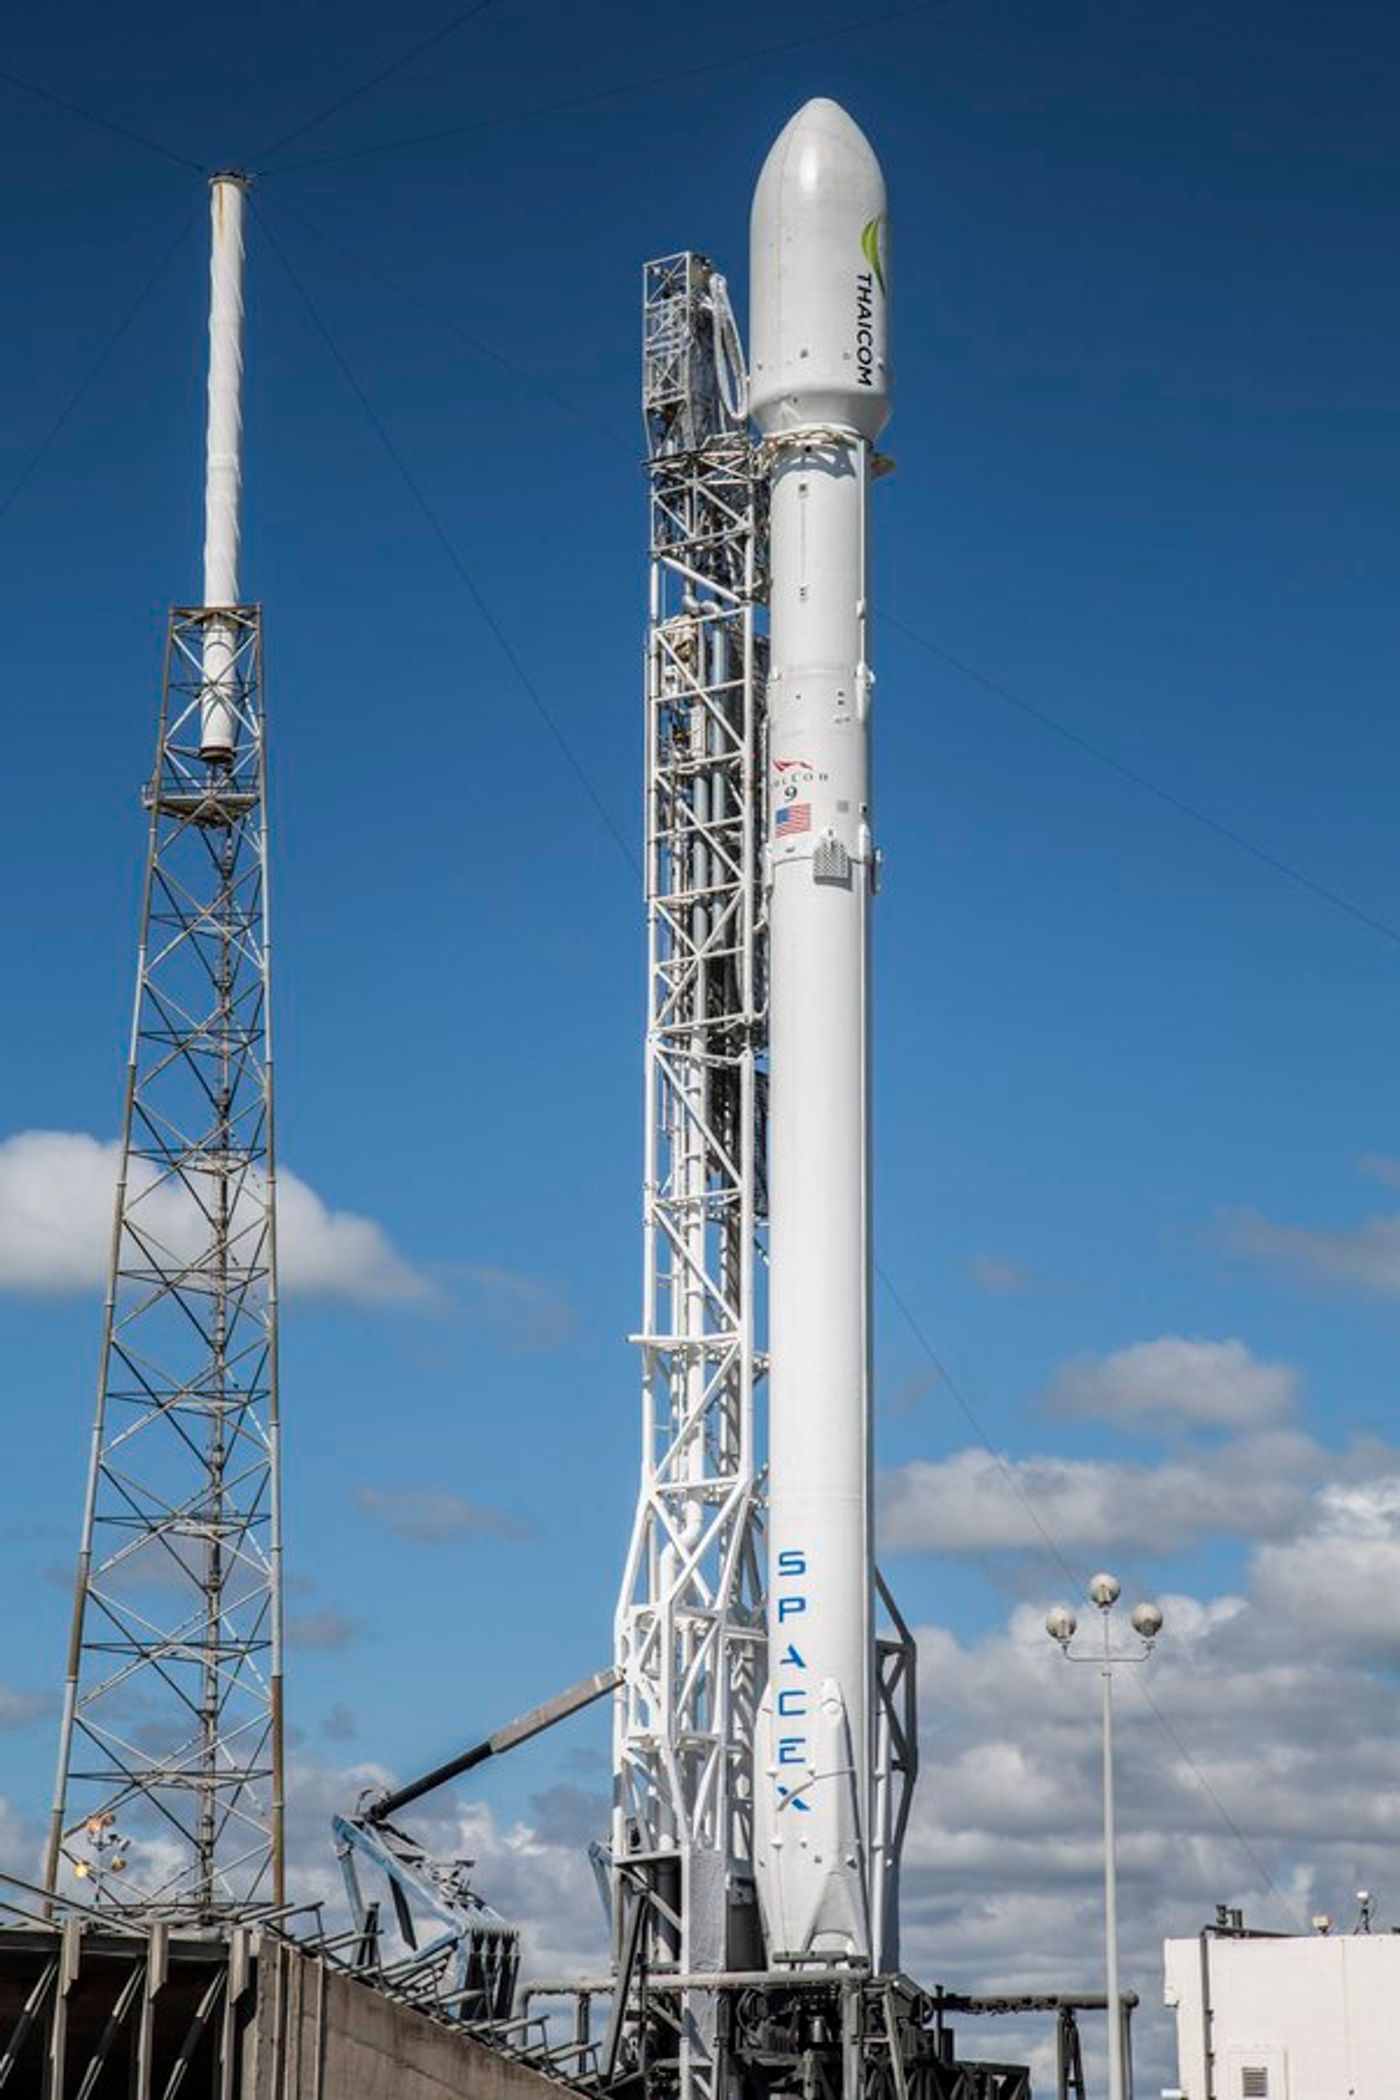 SpaceX will try to launch another telecommunications satellite into space on Friday, then attempt a landing of the Falcon 9 rocket once again.